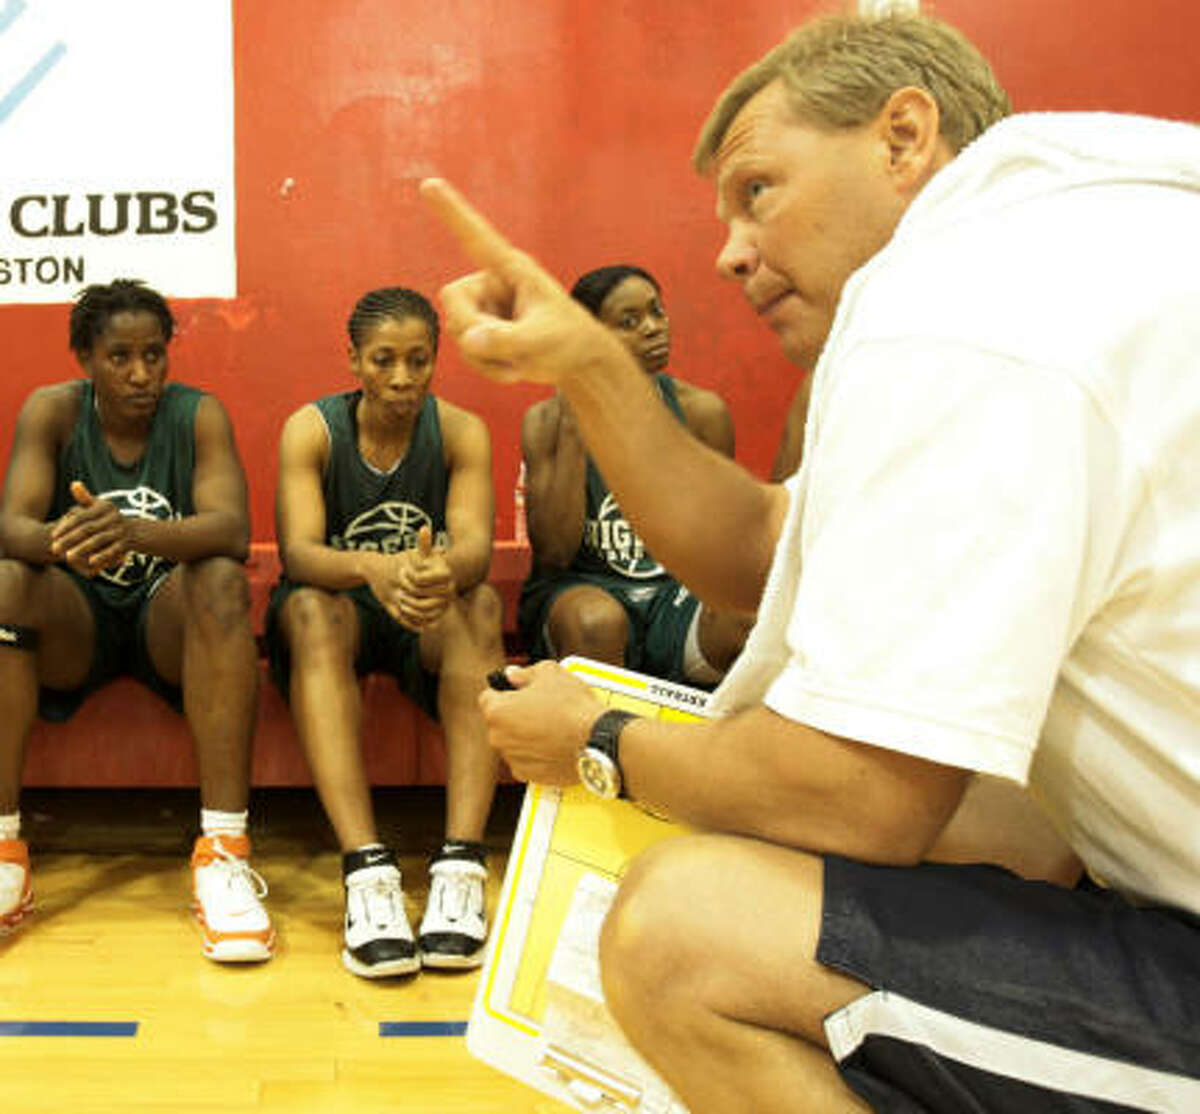 Nigeria coach Kevin Cook predicts the nation will stand one day among the powers in women's basketball.